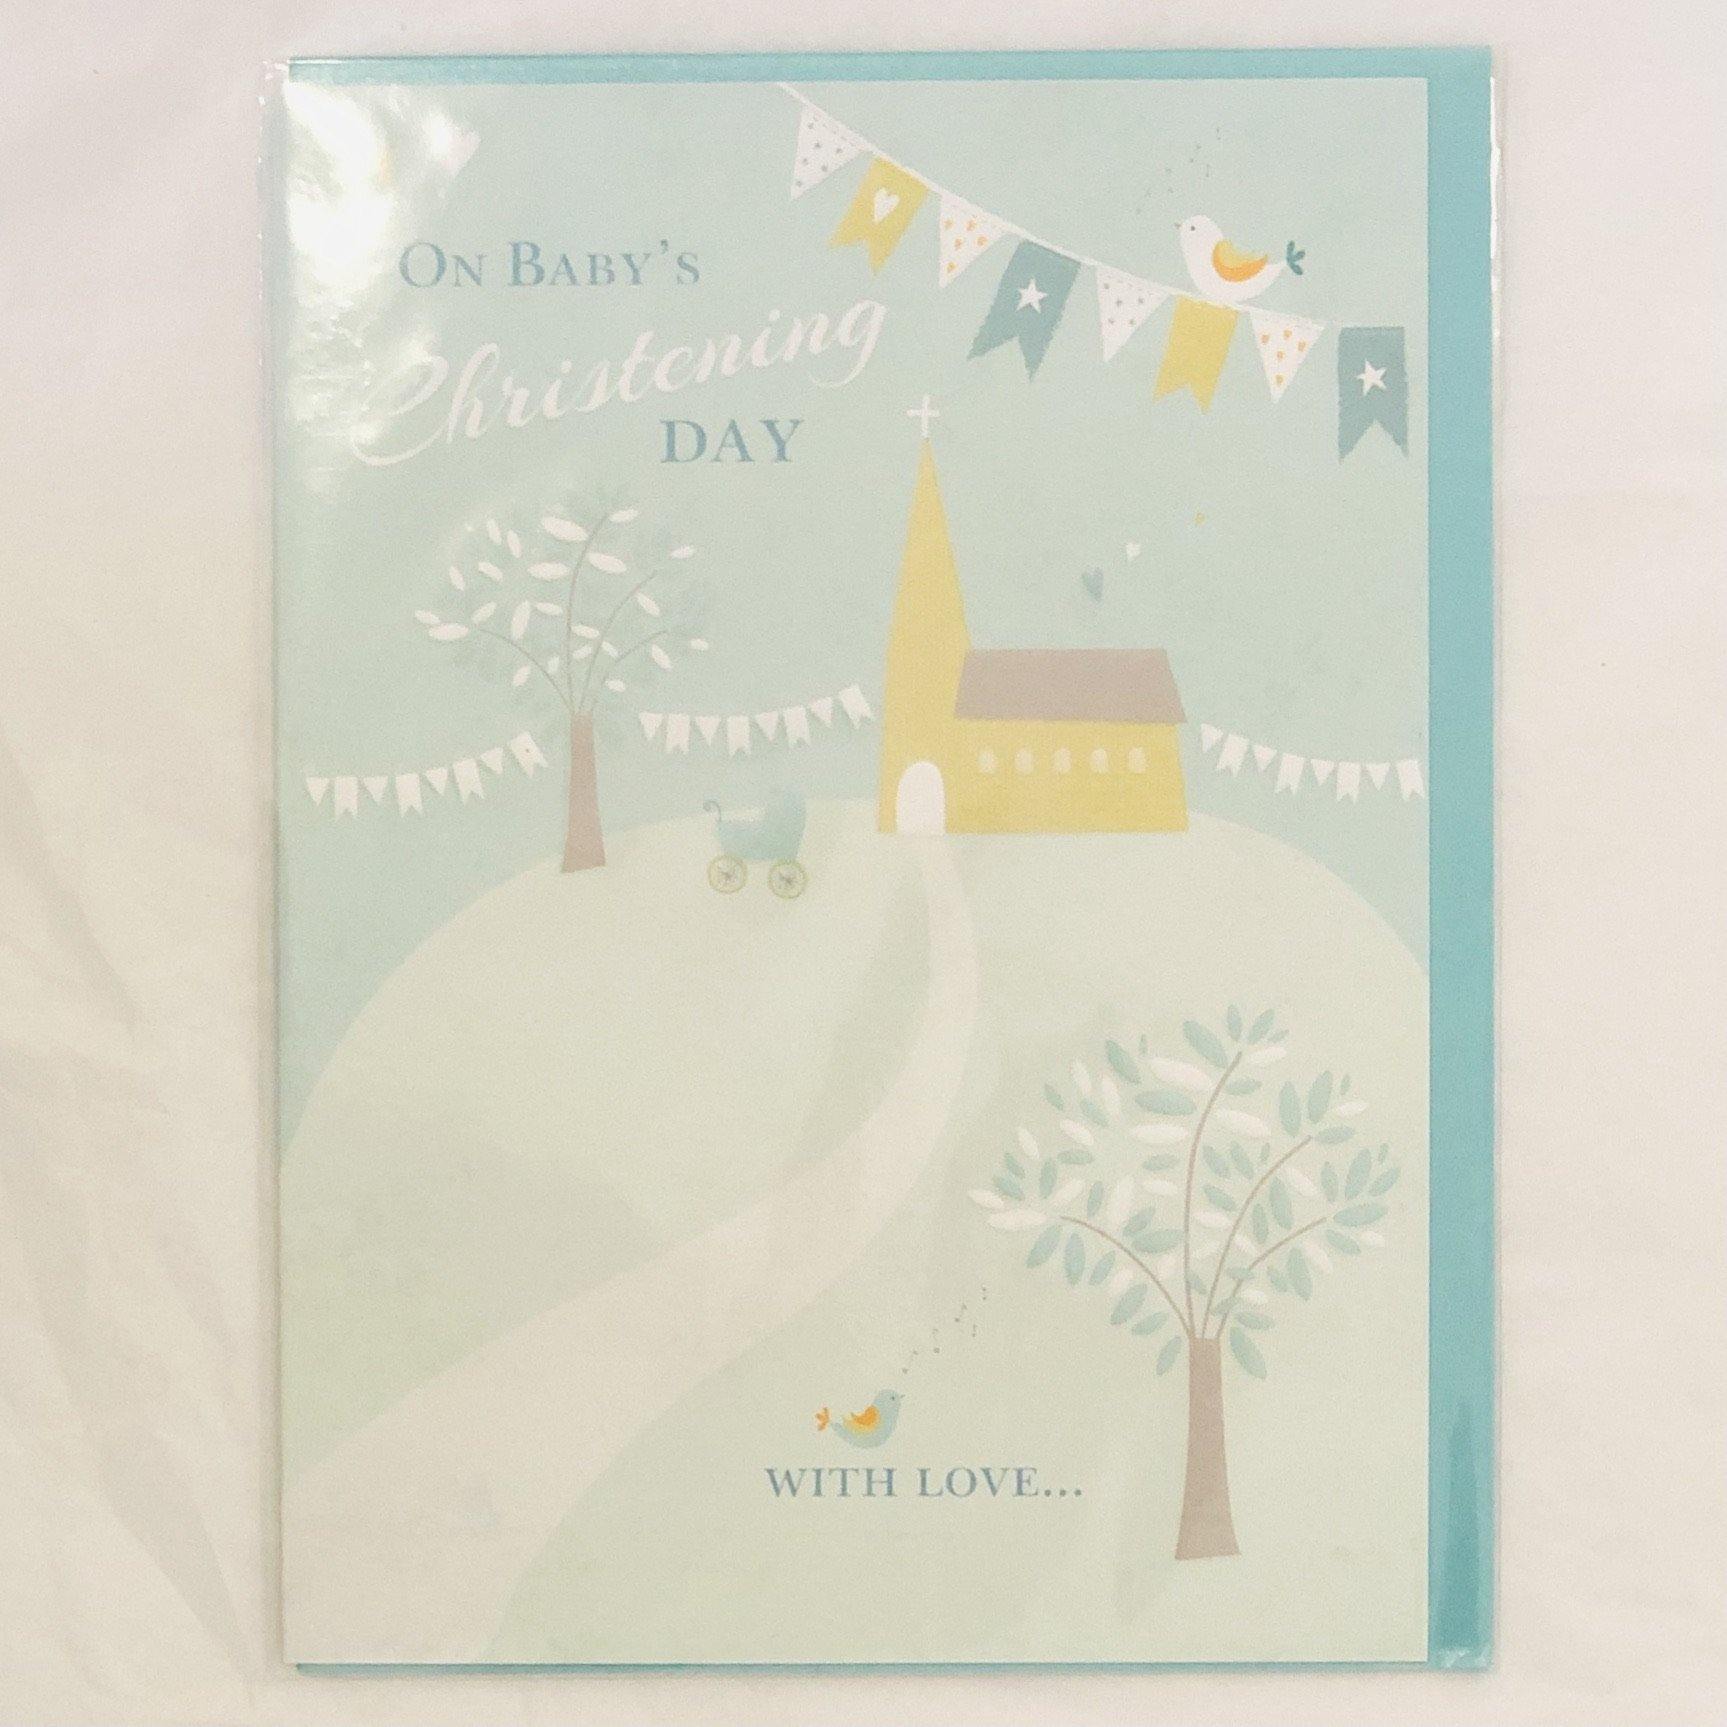 On Baby’s Christening Day Card | Oscar & Me | Baby & Children’s Clothing & Accessories